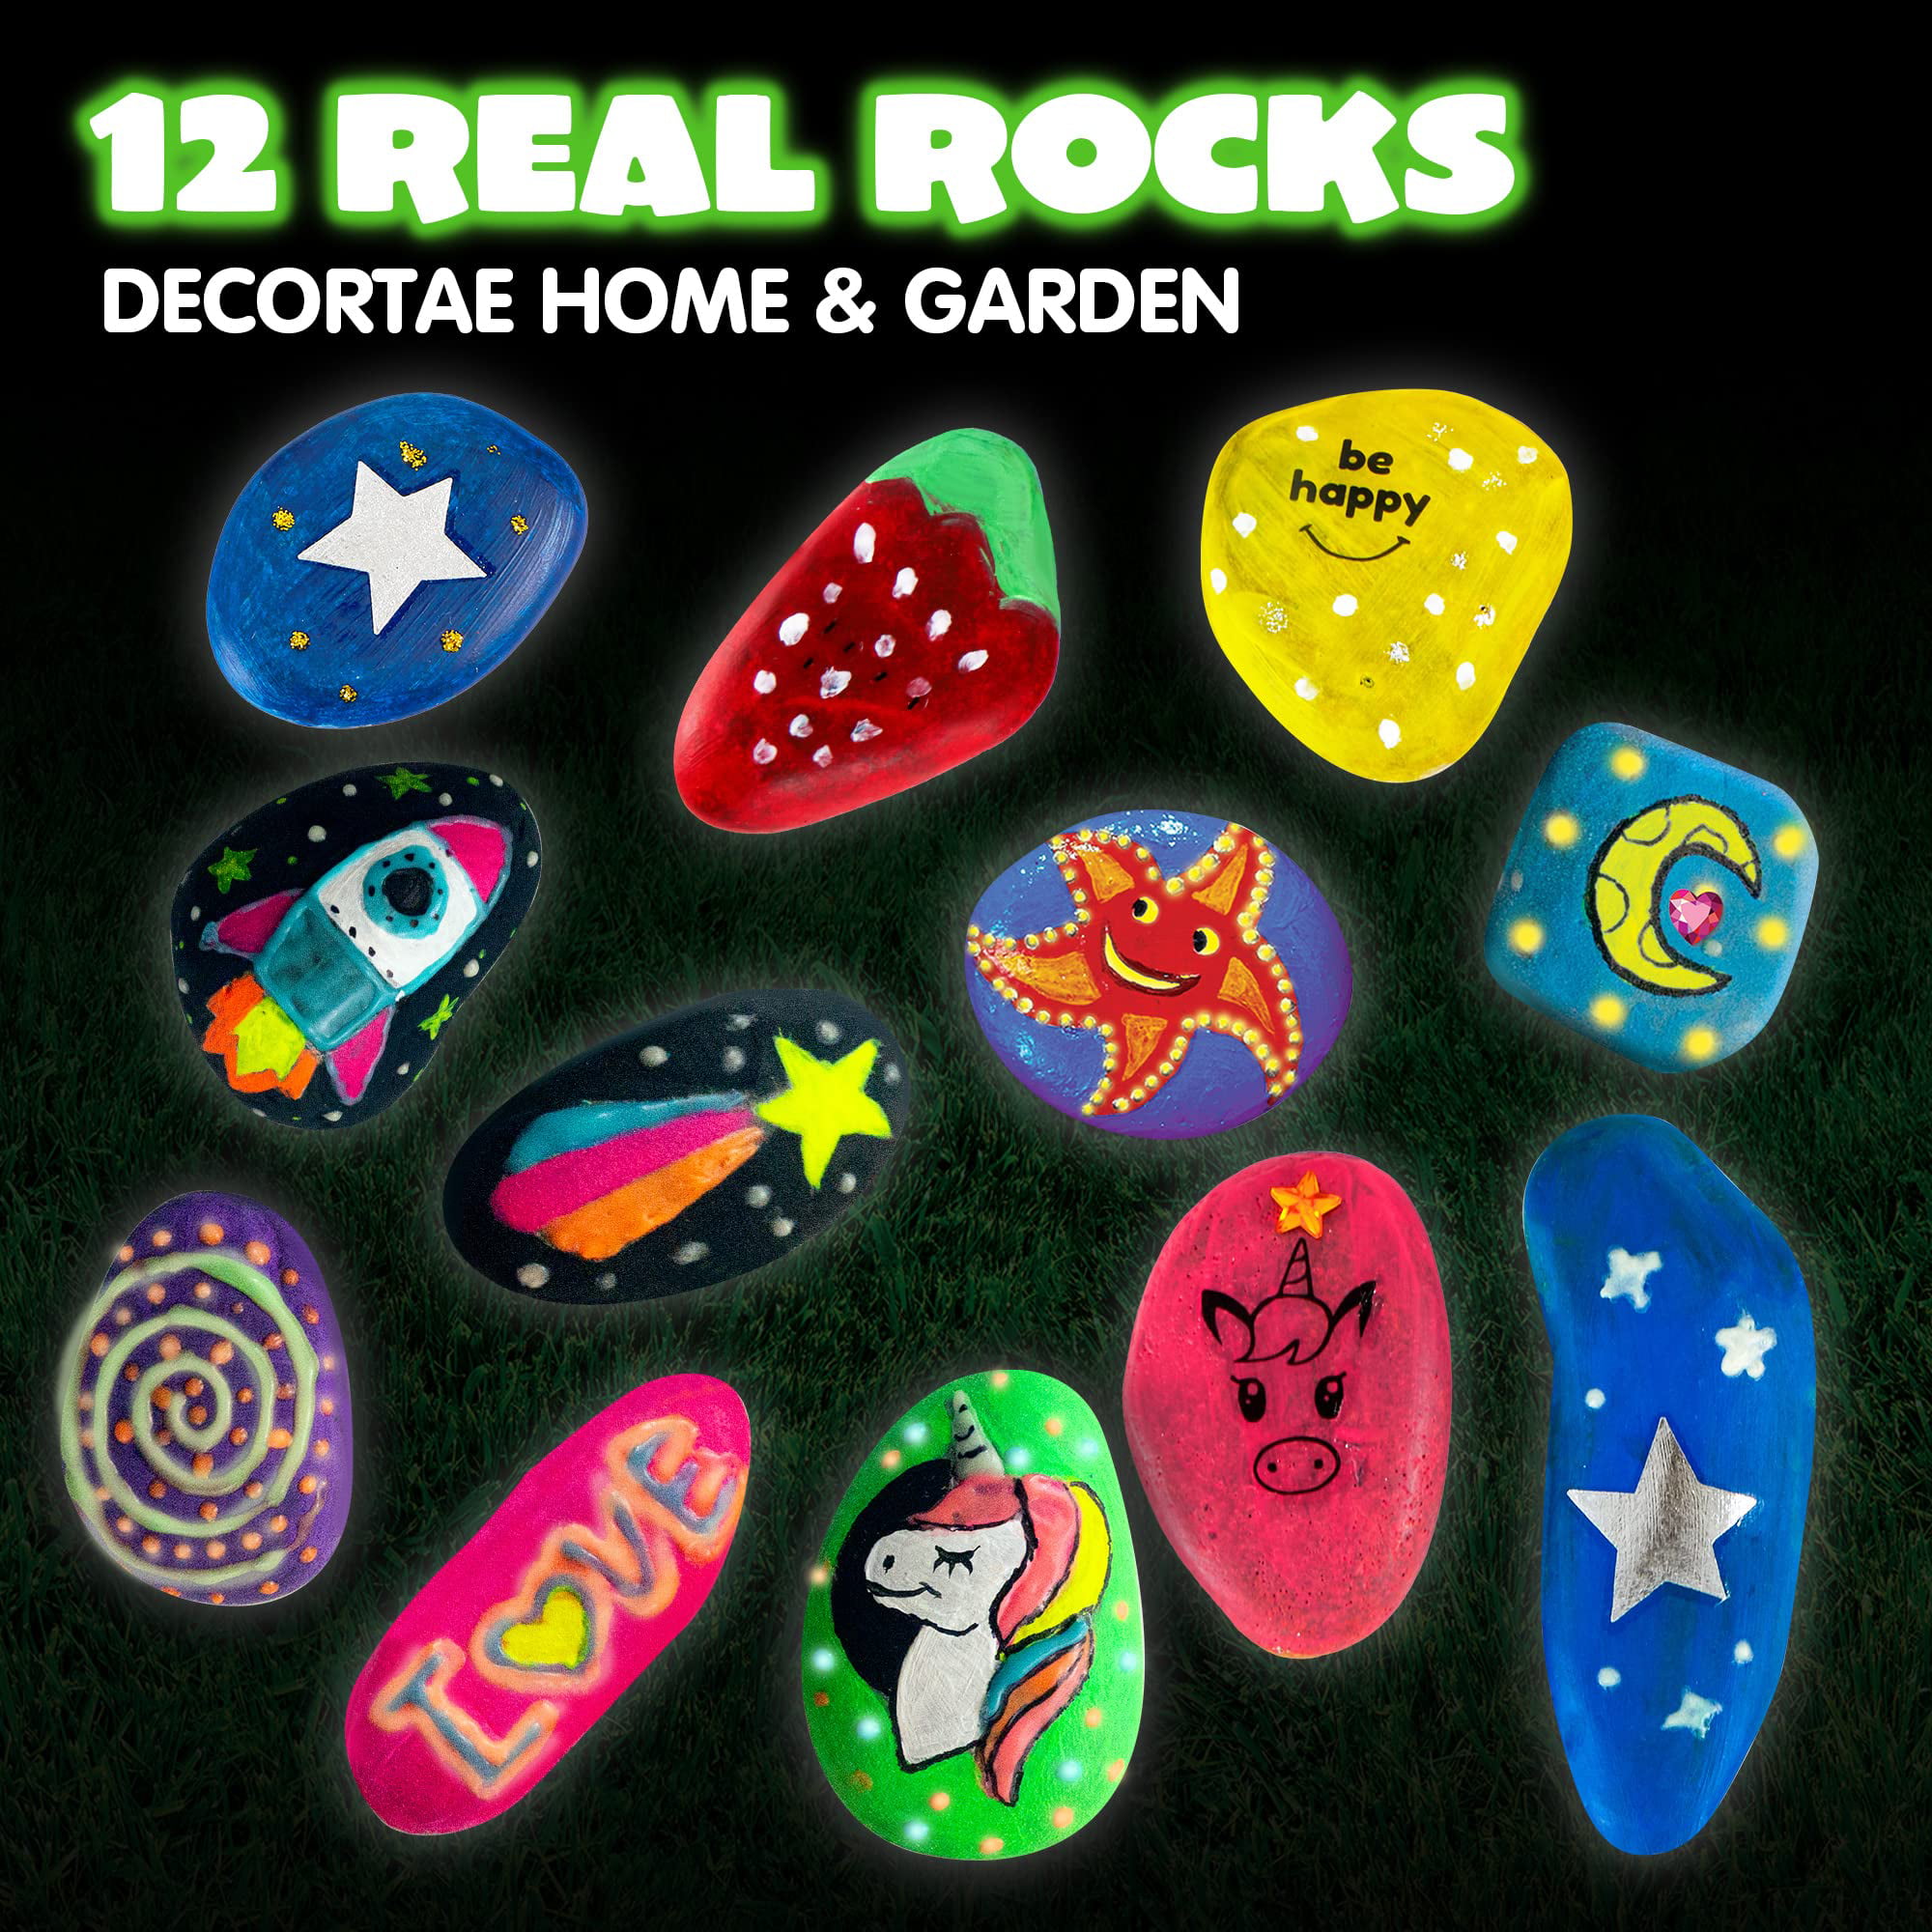 Kids Rock Painting Kit - Glow in The Dark - Arts & Crafts Gifts for Boys  and Girls Ages 4-12 - Craft Activities Kits - Creative Art Toys for 4, 5,  6